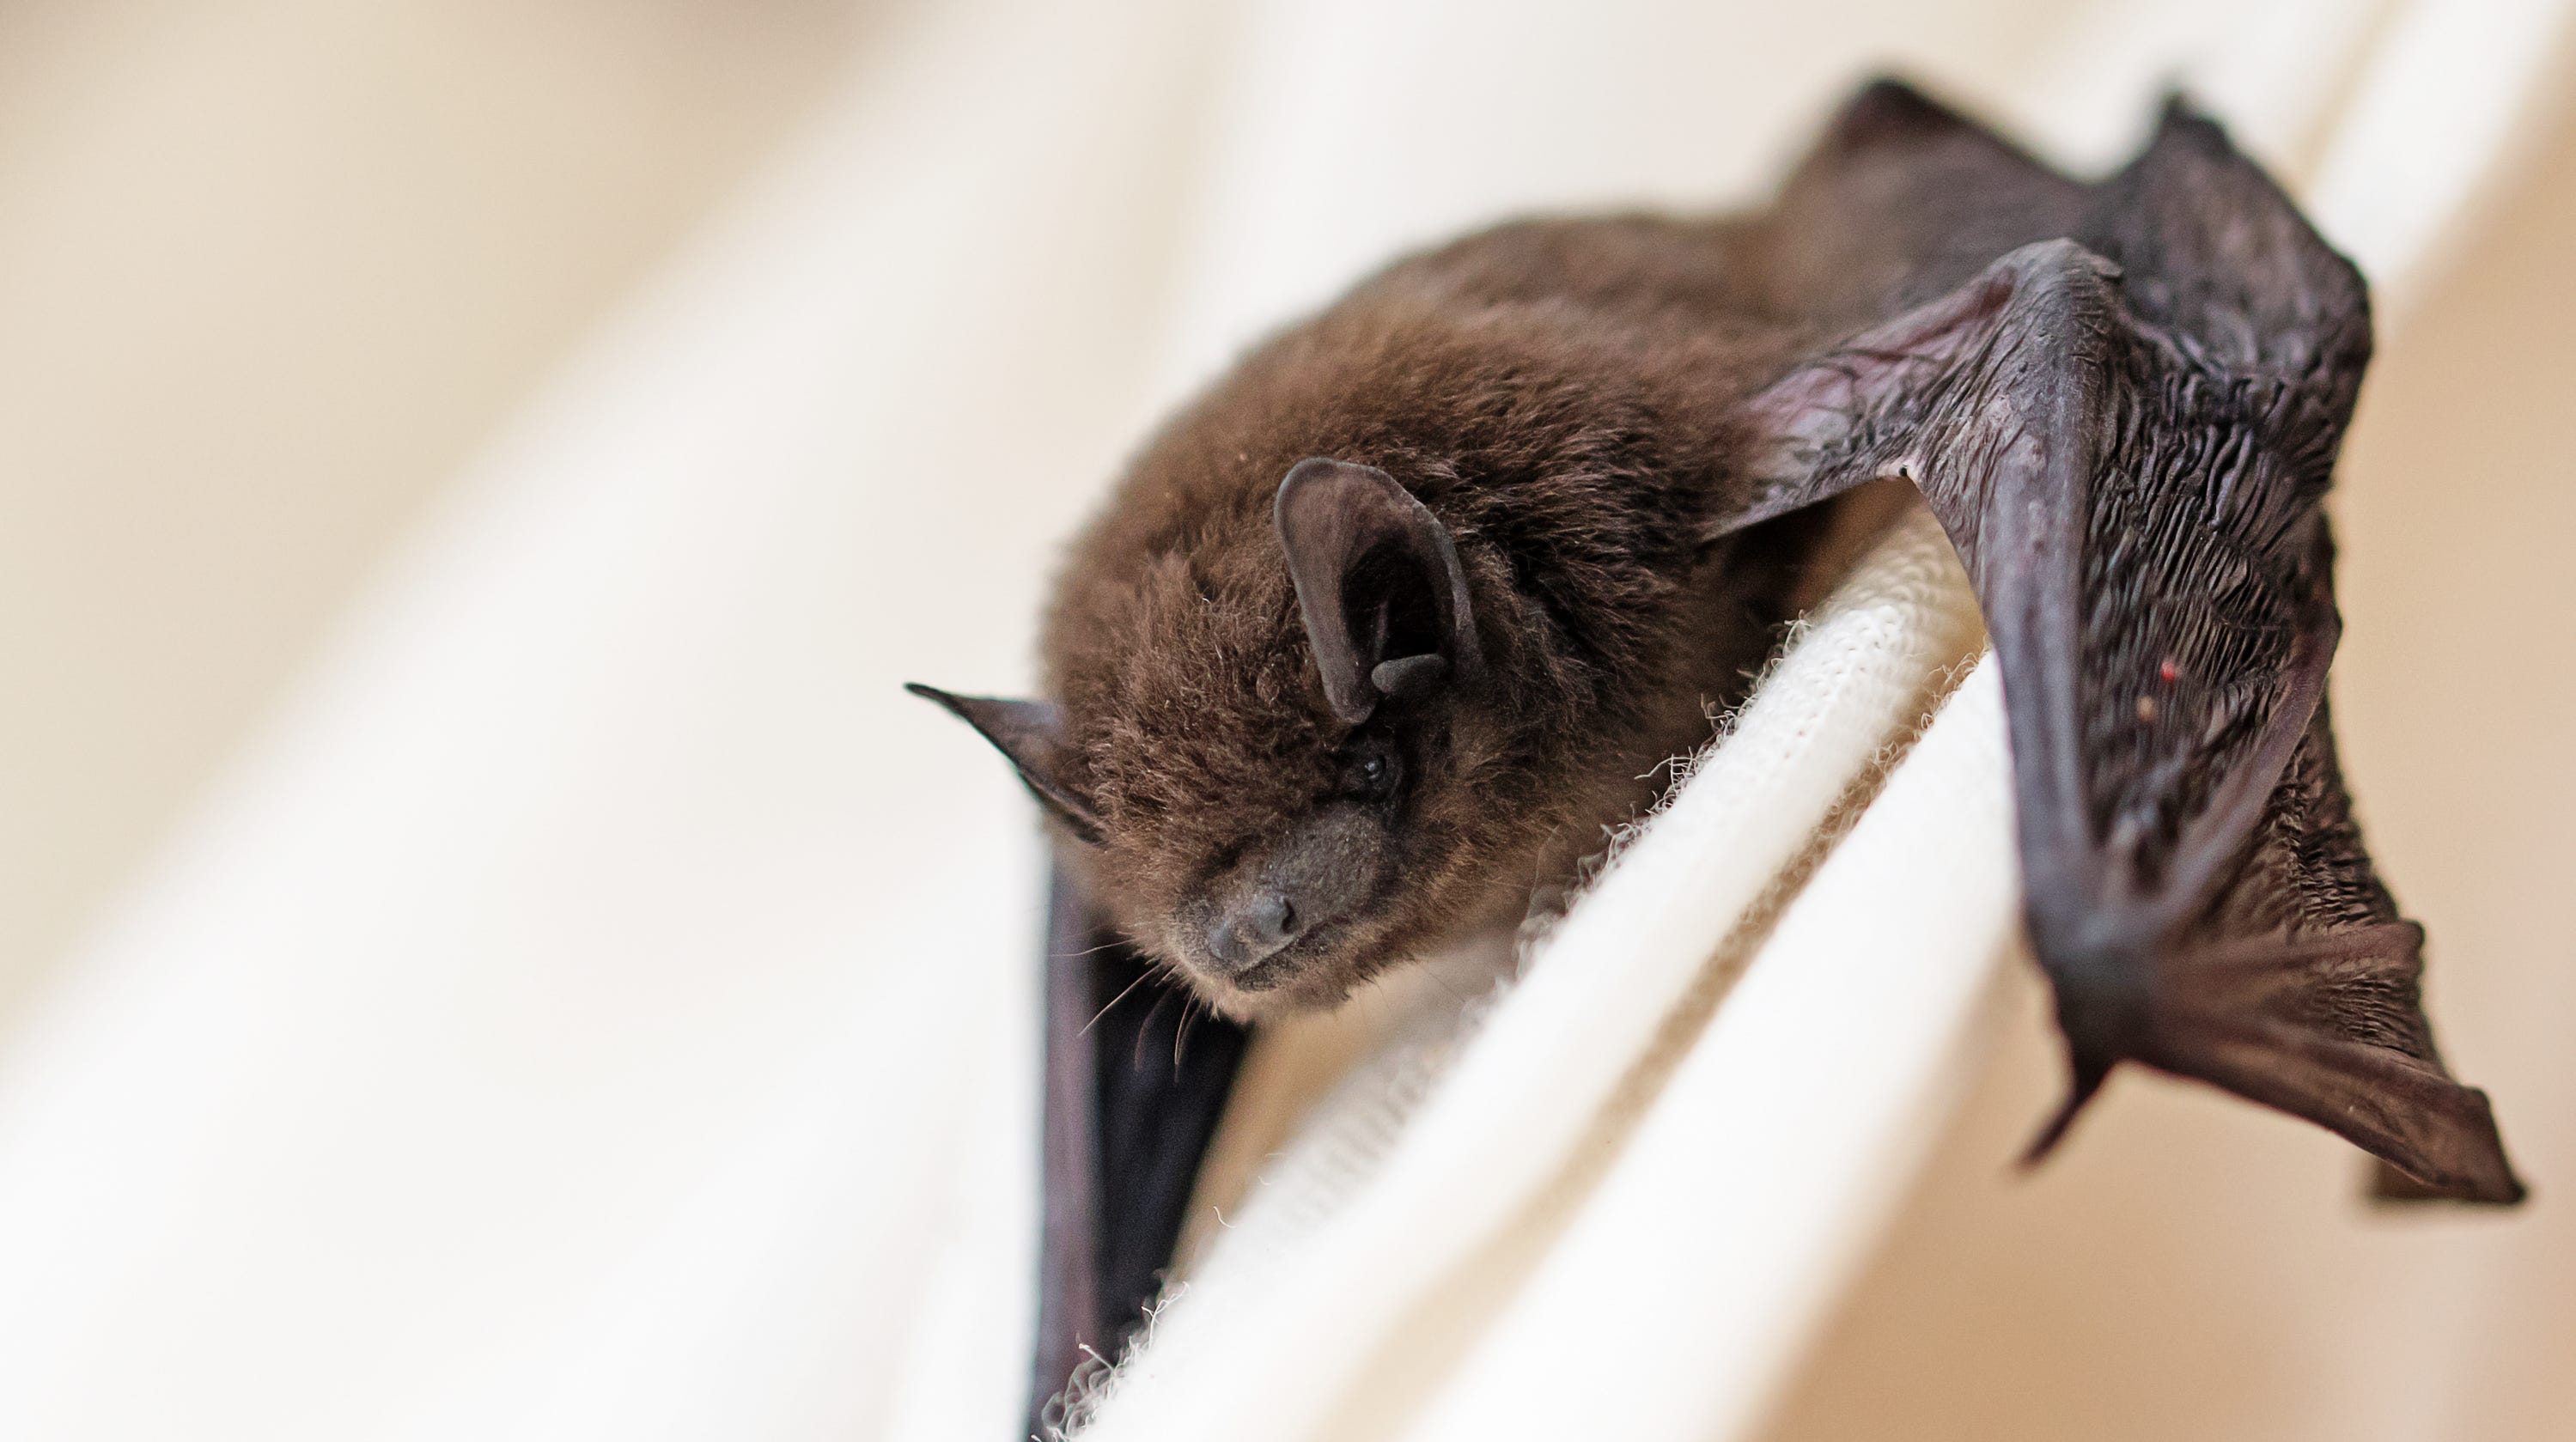 Bat In House How To Remove A Bat From Your Home Tips Who To Call